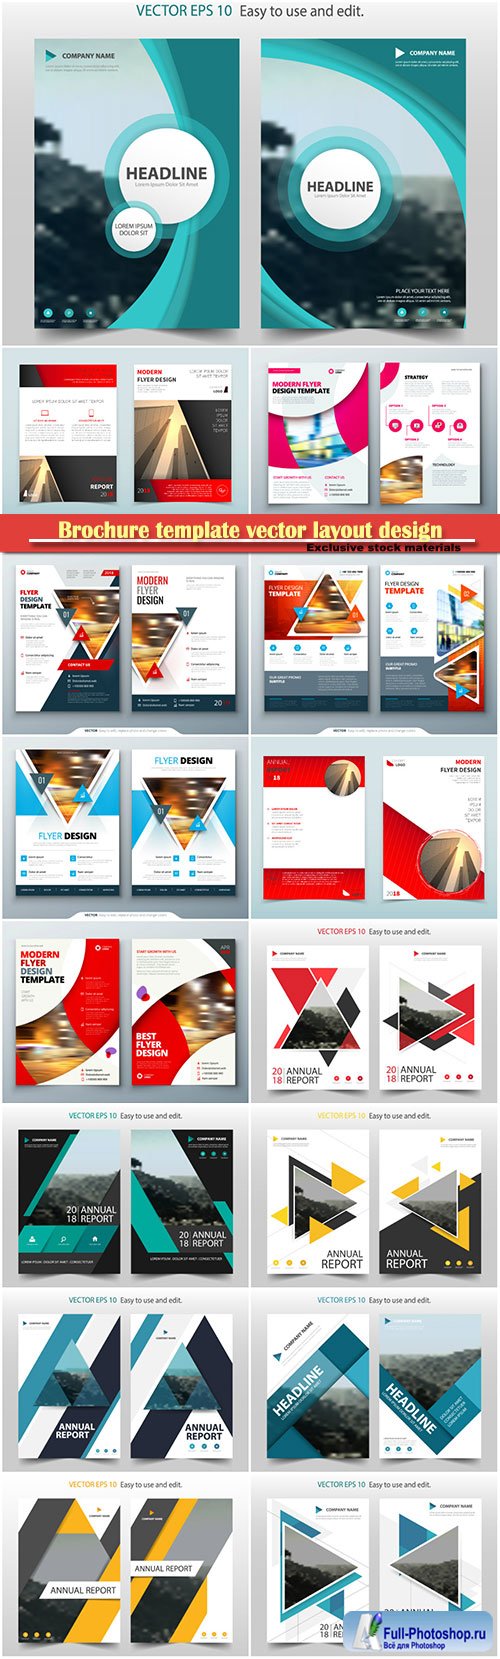 Brochure template vector layout design, corporate business annual report, magazine, flyer mockup # 109